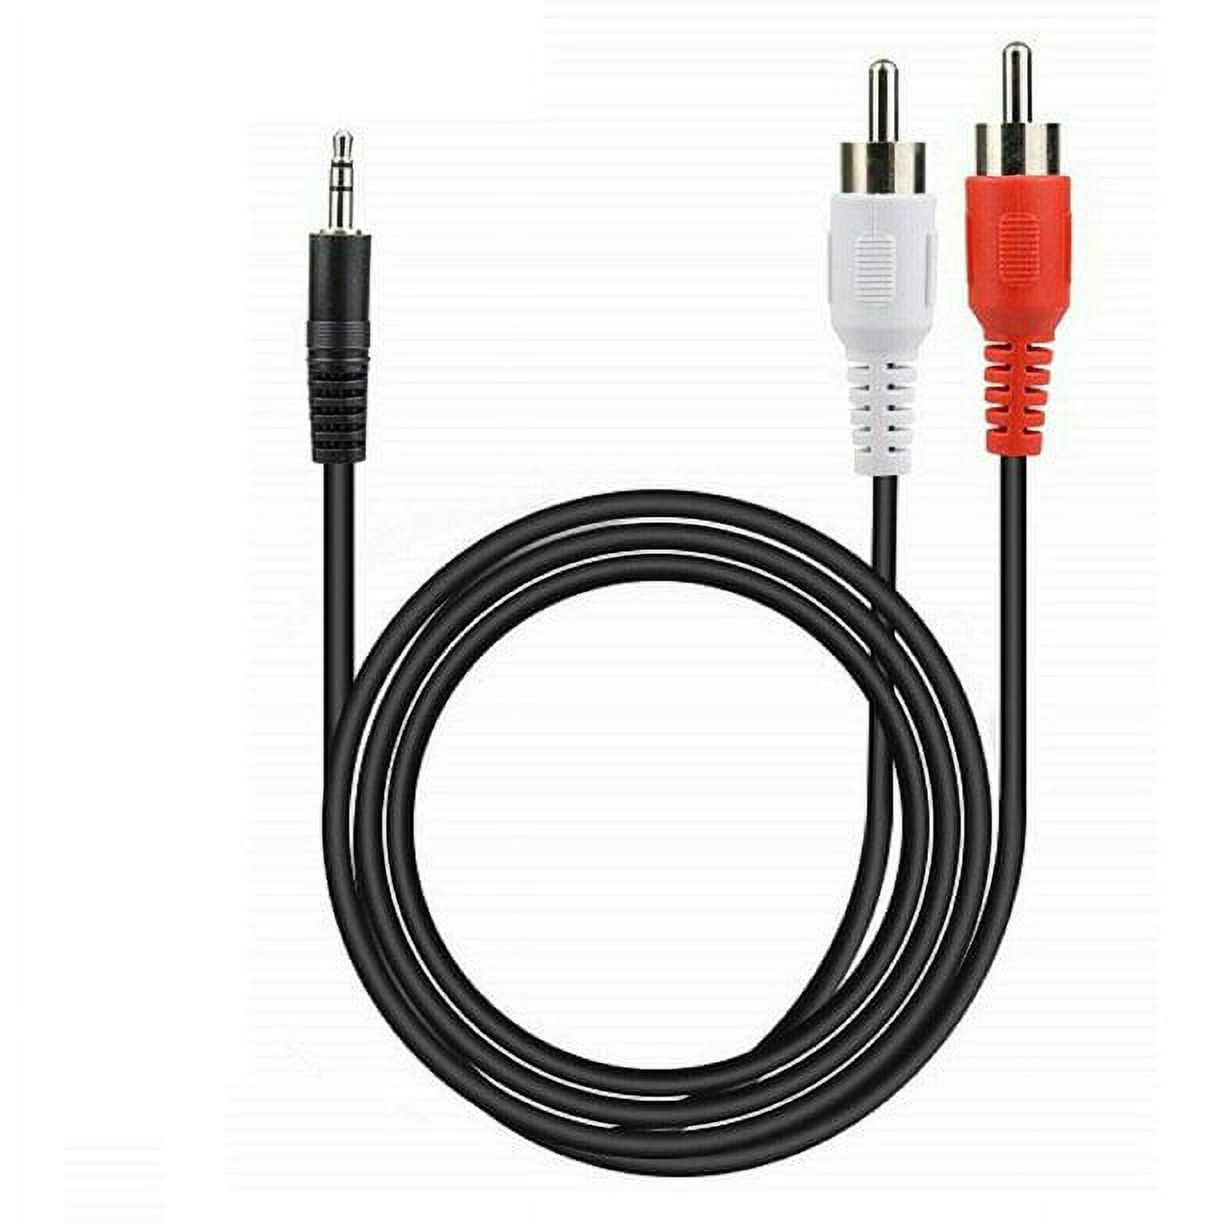 UPBRIGHT AUX IN Audio RCA Cable Cord For VIZIO 29" 32??38" 40" 42" Home Theater Sound Bar Wireless Subwoofer SoundBar Speaker (To Convert AUX Input stereo audio plug into two mono RCA plugs ) - image 5 of 5